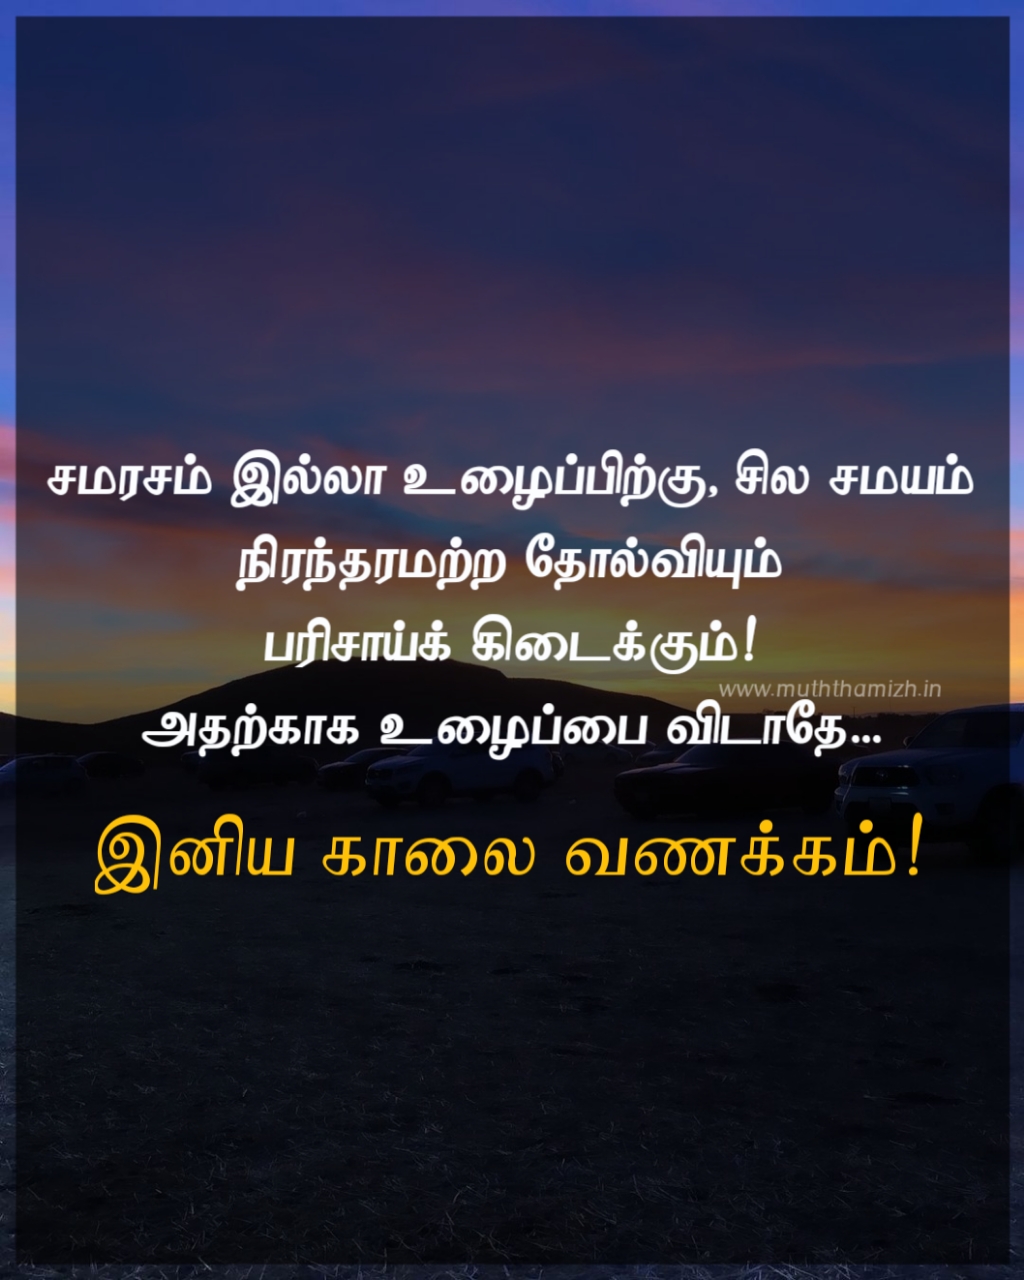 morning wishes in tamil